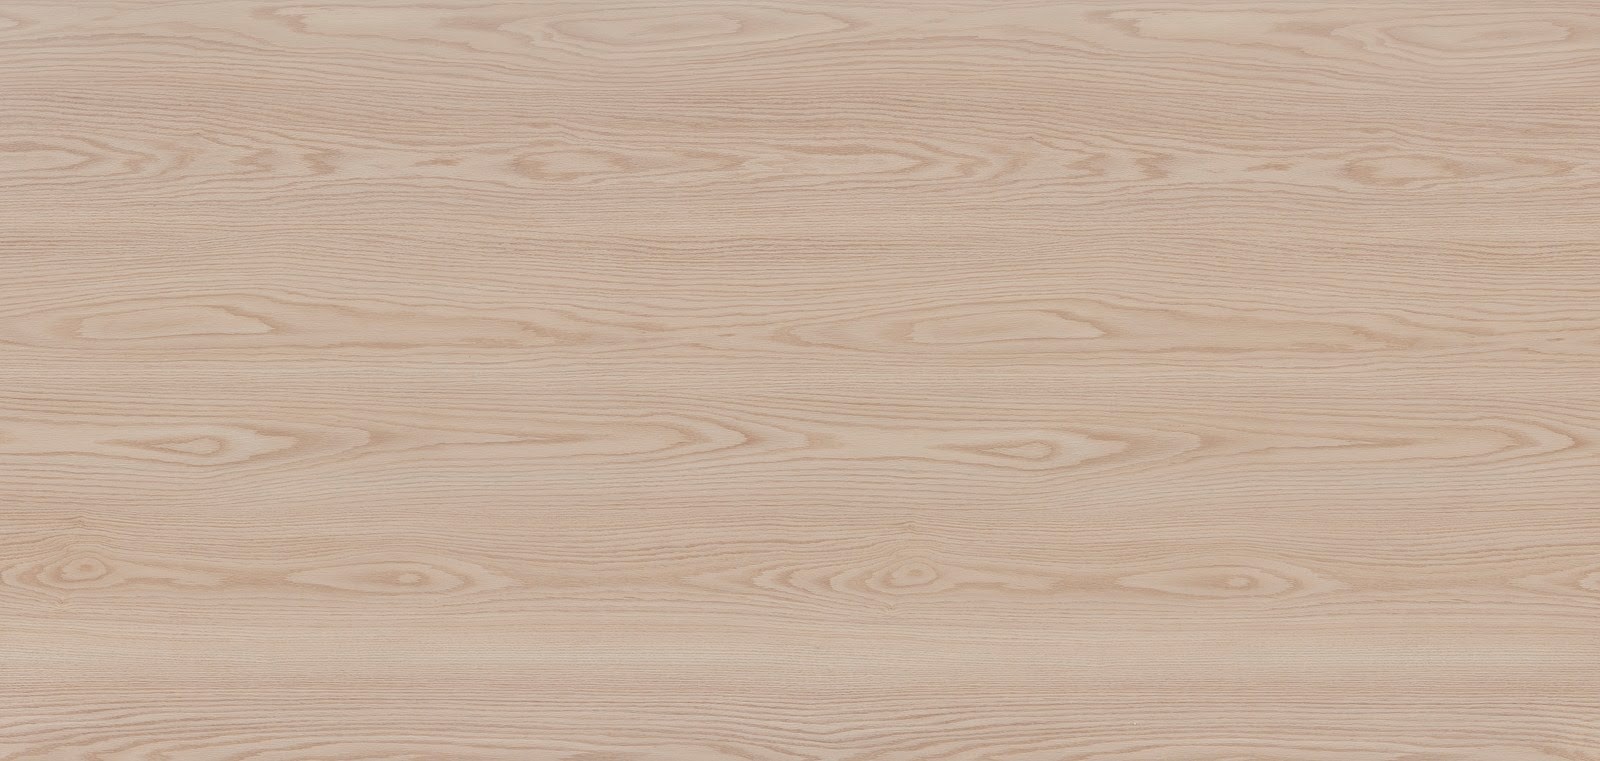 wood texture mapping